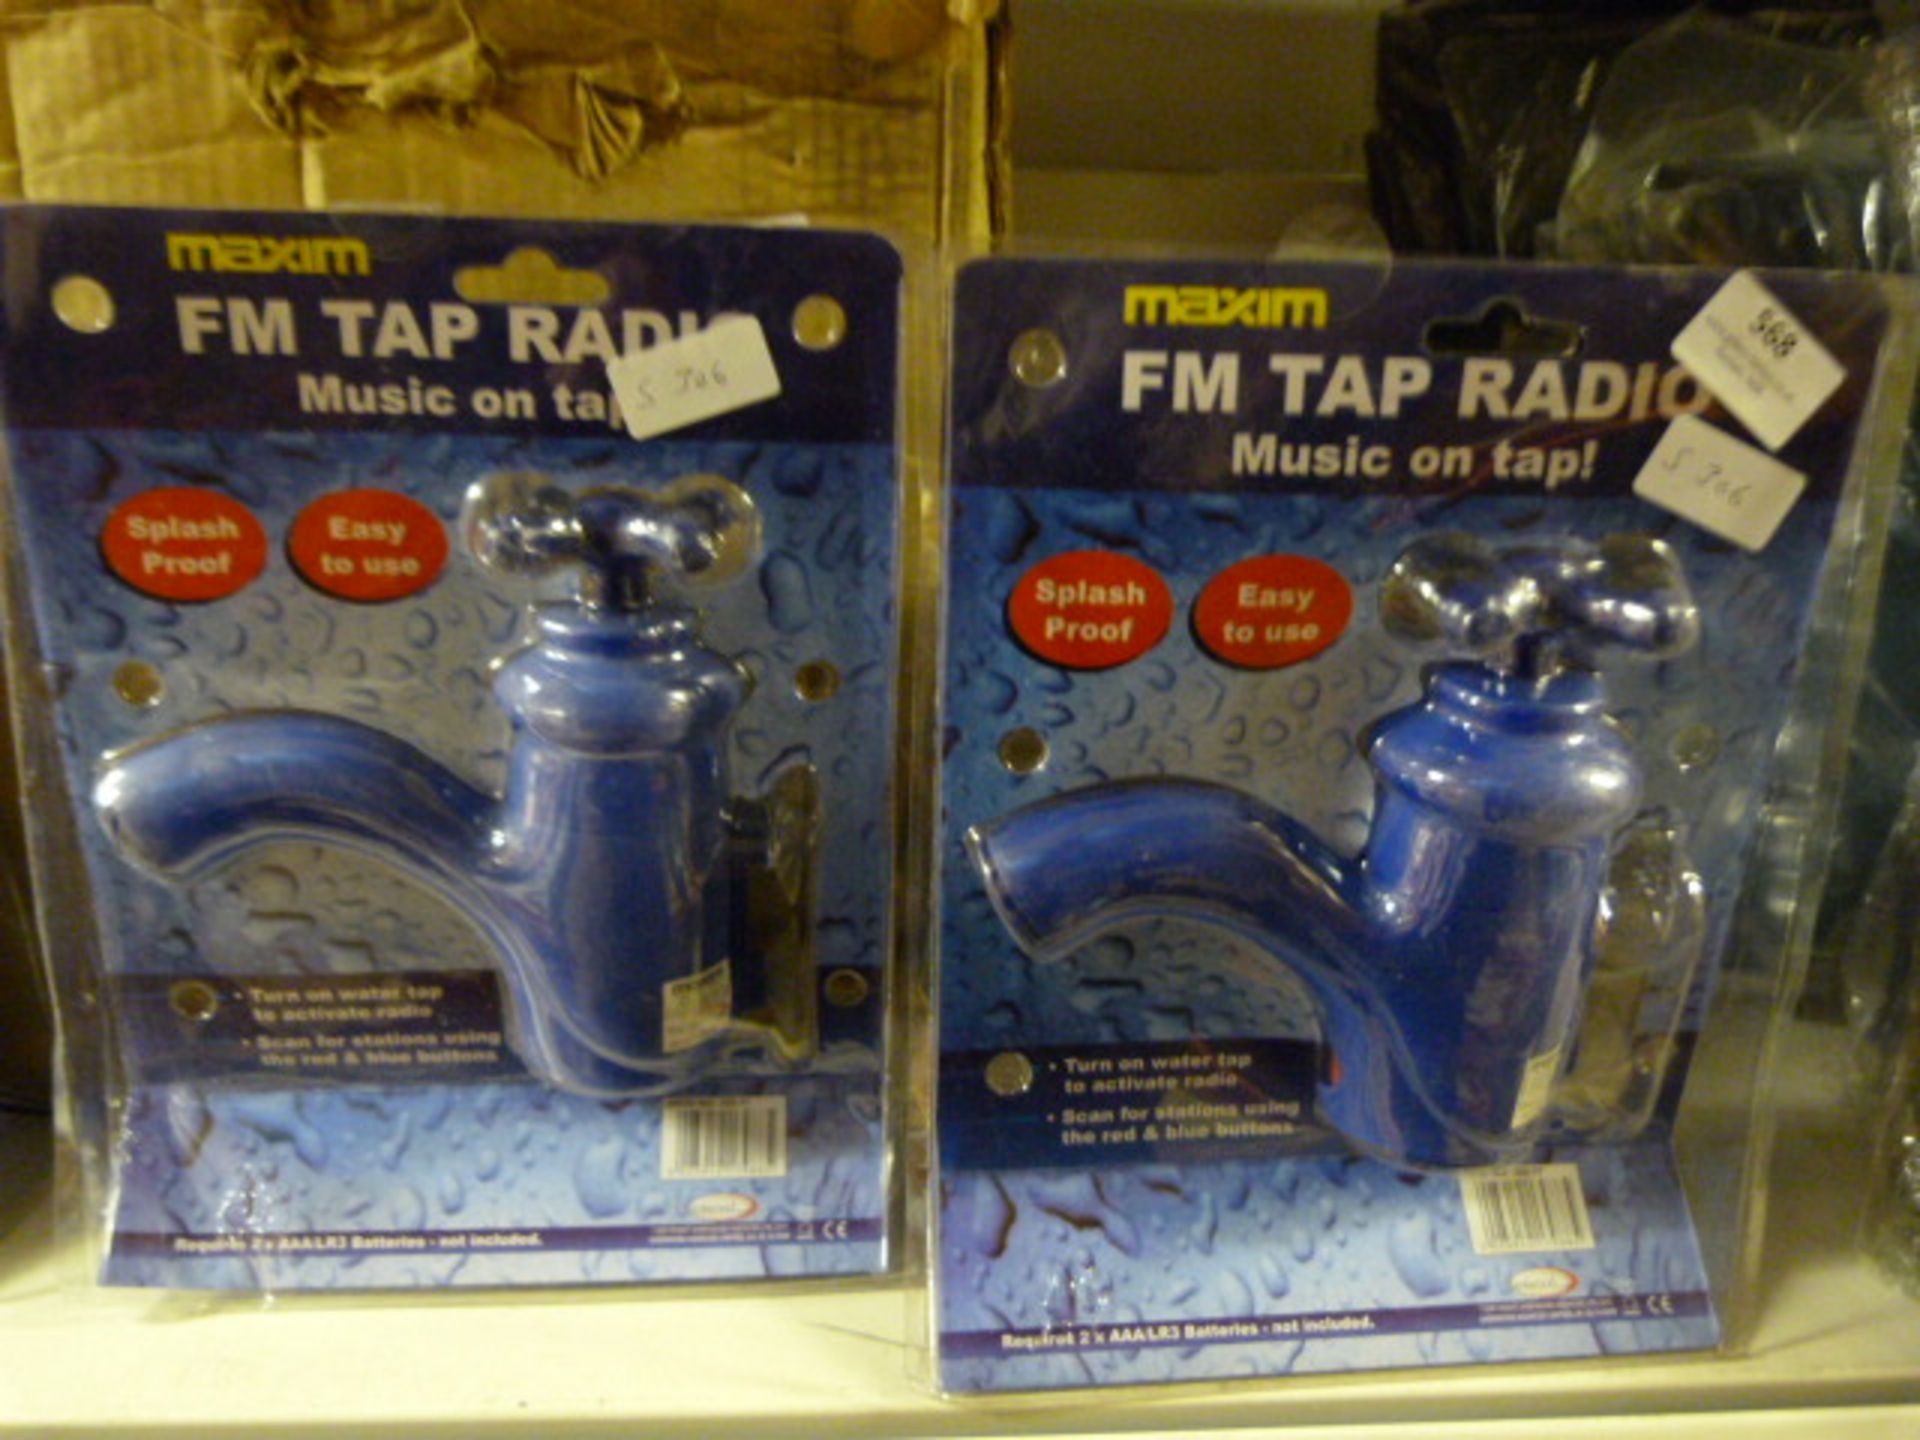 Two Blue Novelty FM Tap Radios